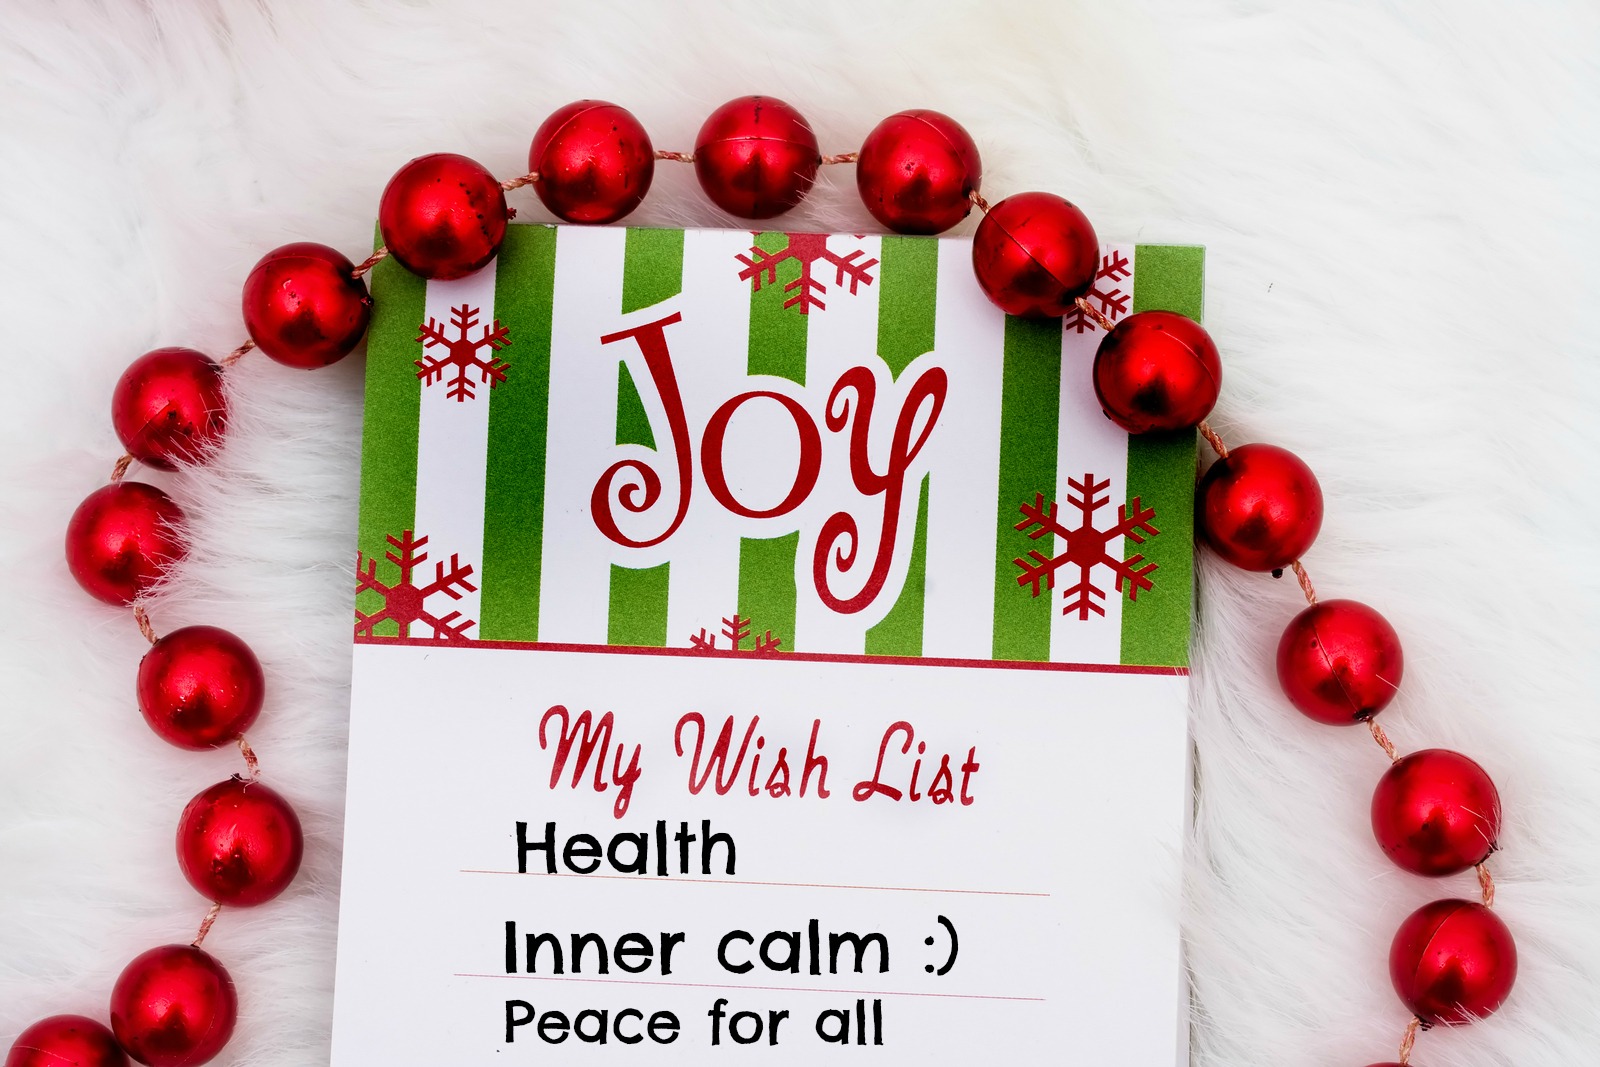 A Christmas wish list decorated with small baubles. The list has three items: health, inner calm and peace for all